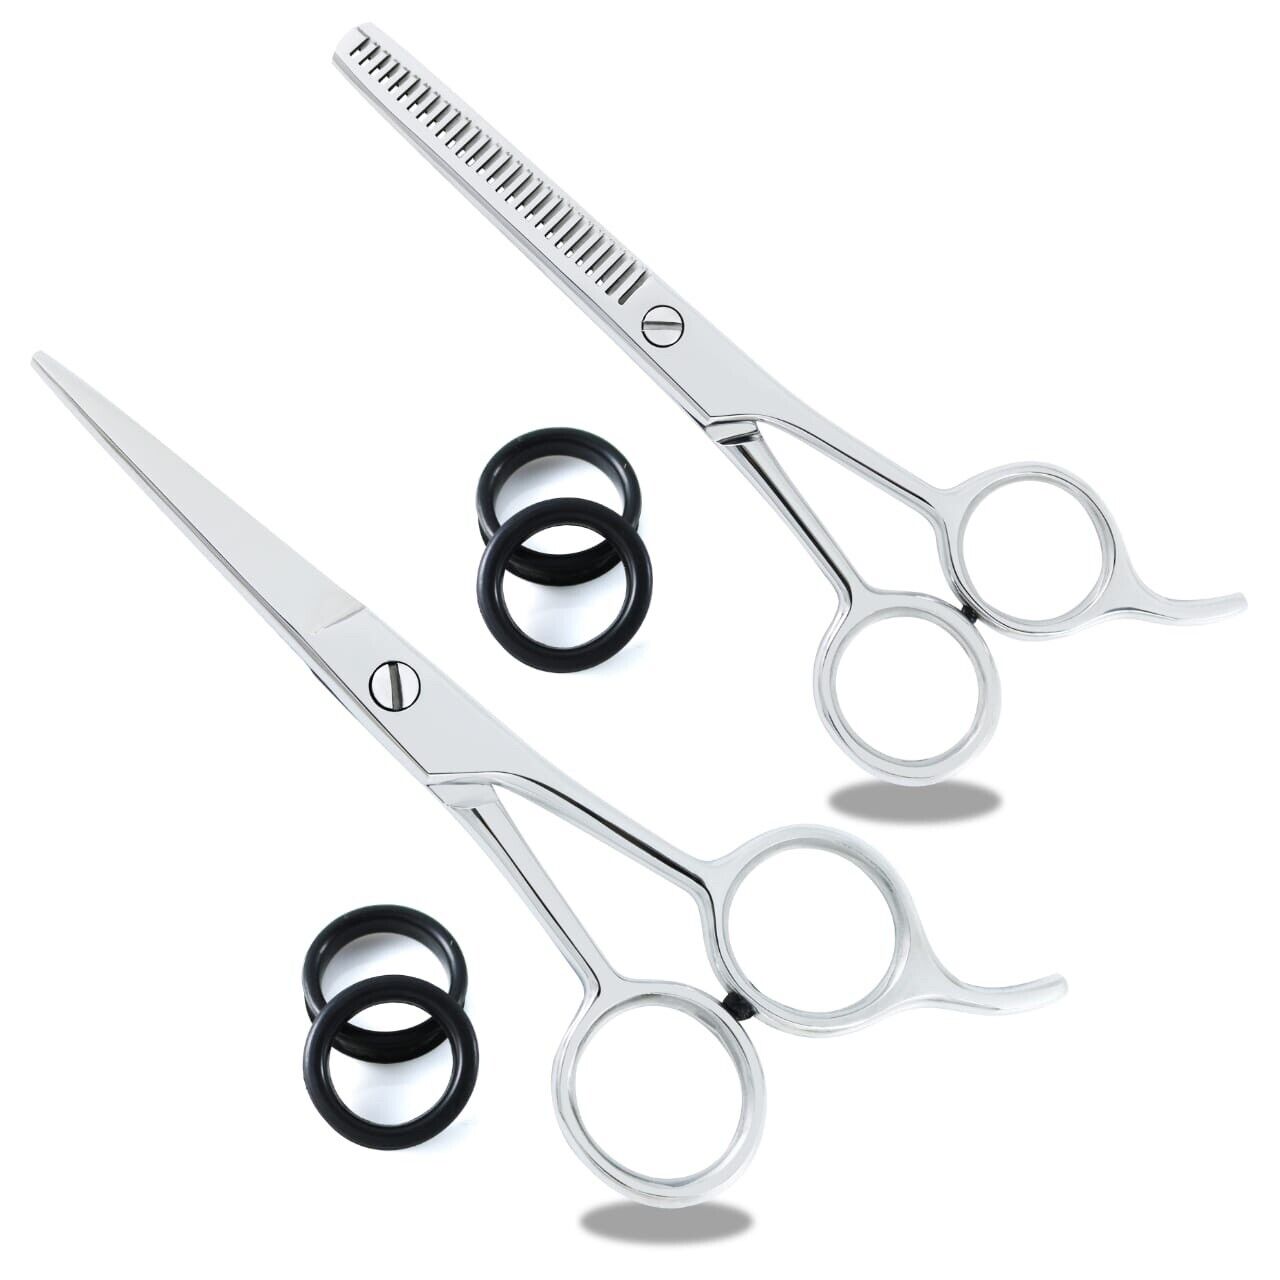 PROFESSIONAL SALON HAIR CUTTING&THINNING SCISSORS BARBER SHEARS HAIRDRESSING vertical int Does Not Apply